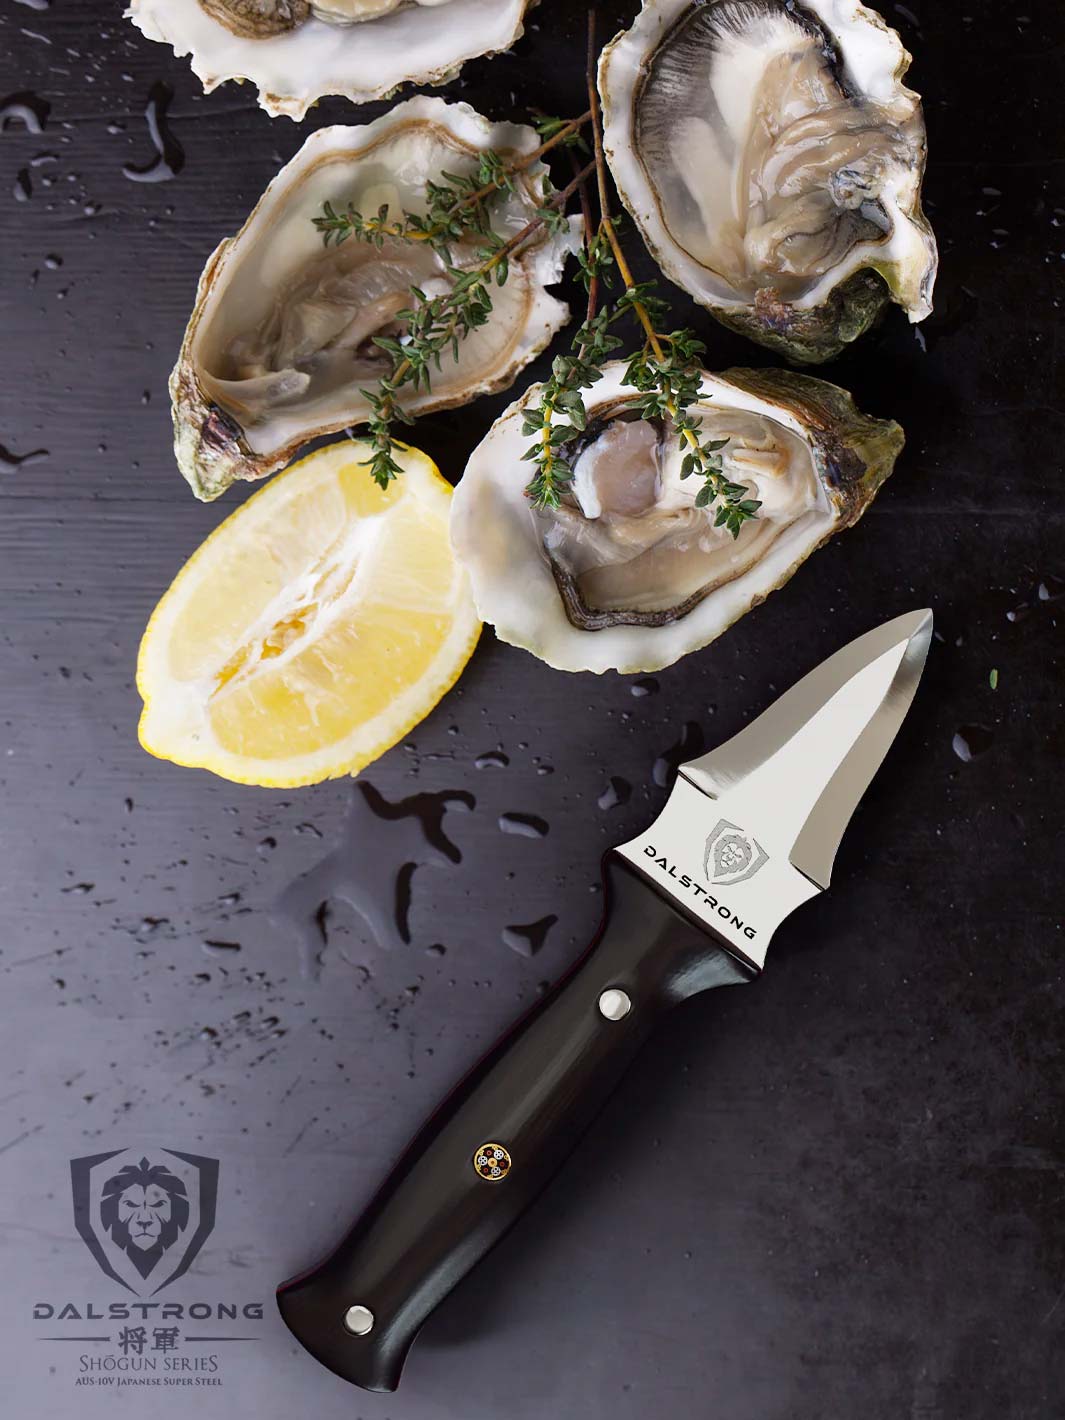 Dalstrong shogun series 3.5 inch oyster knife with black handle and shucked oysters at the top.